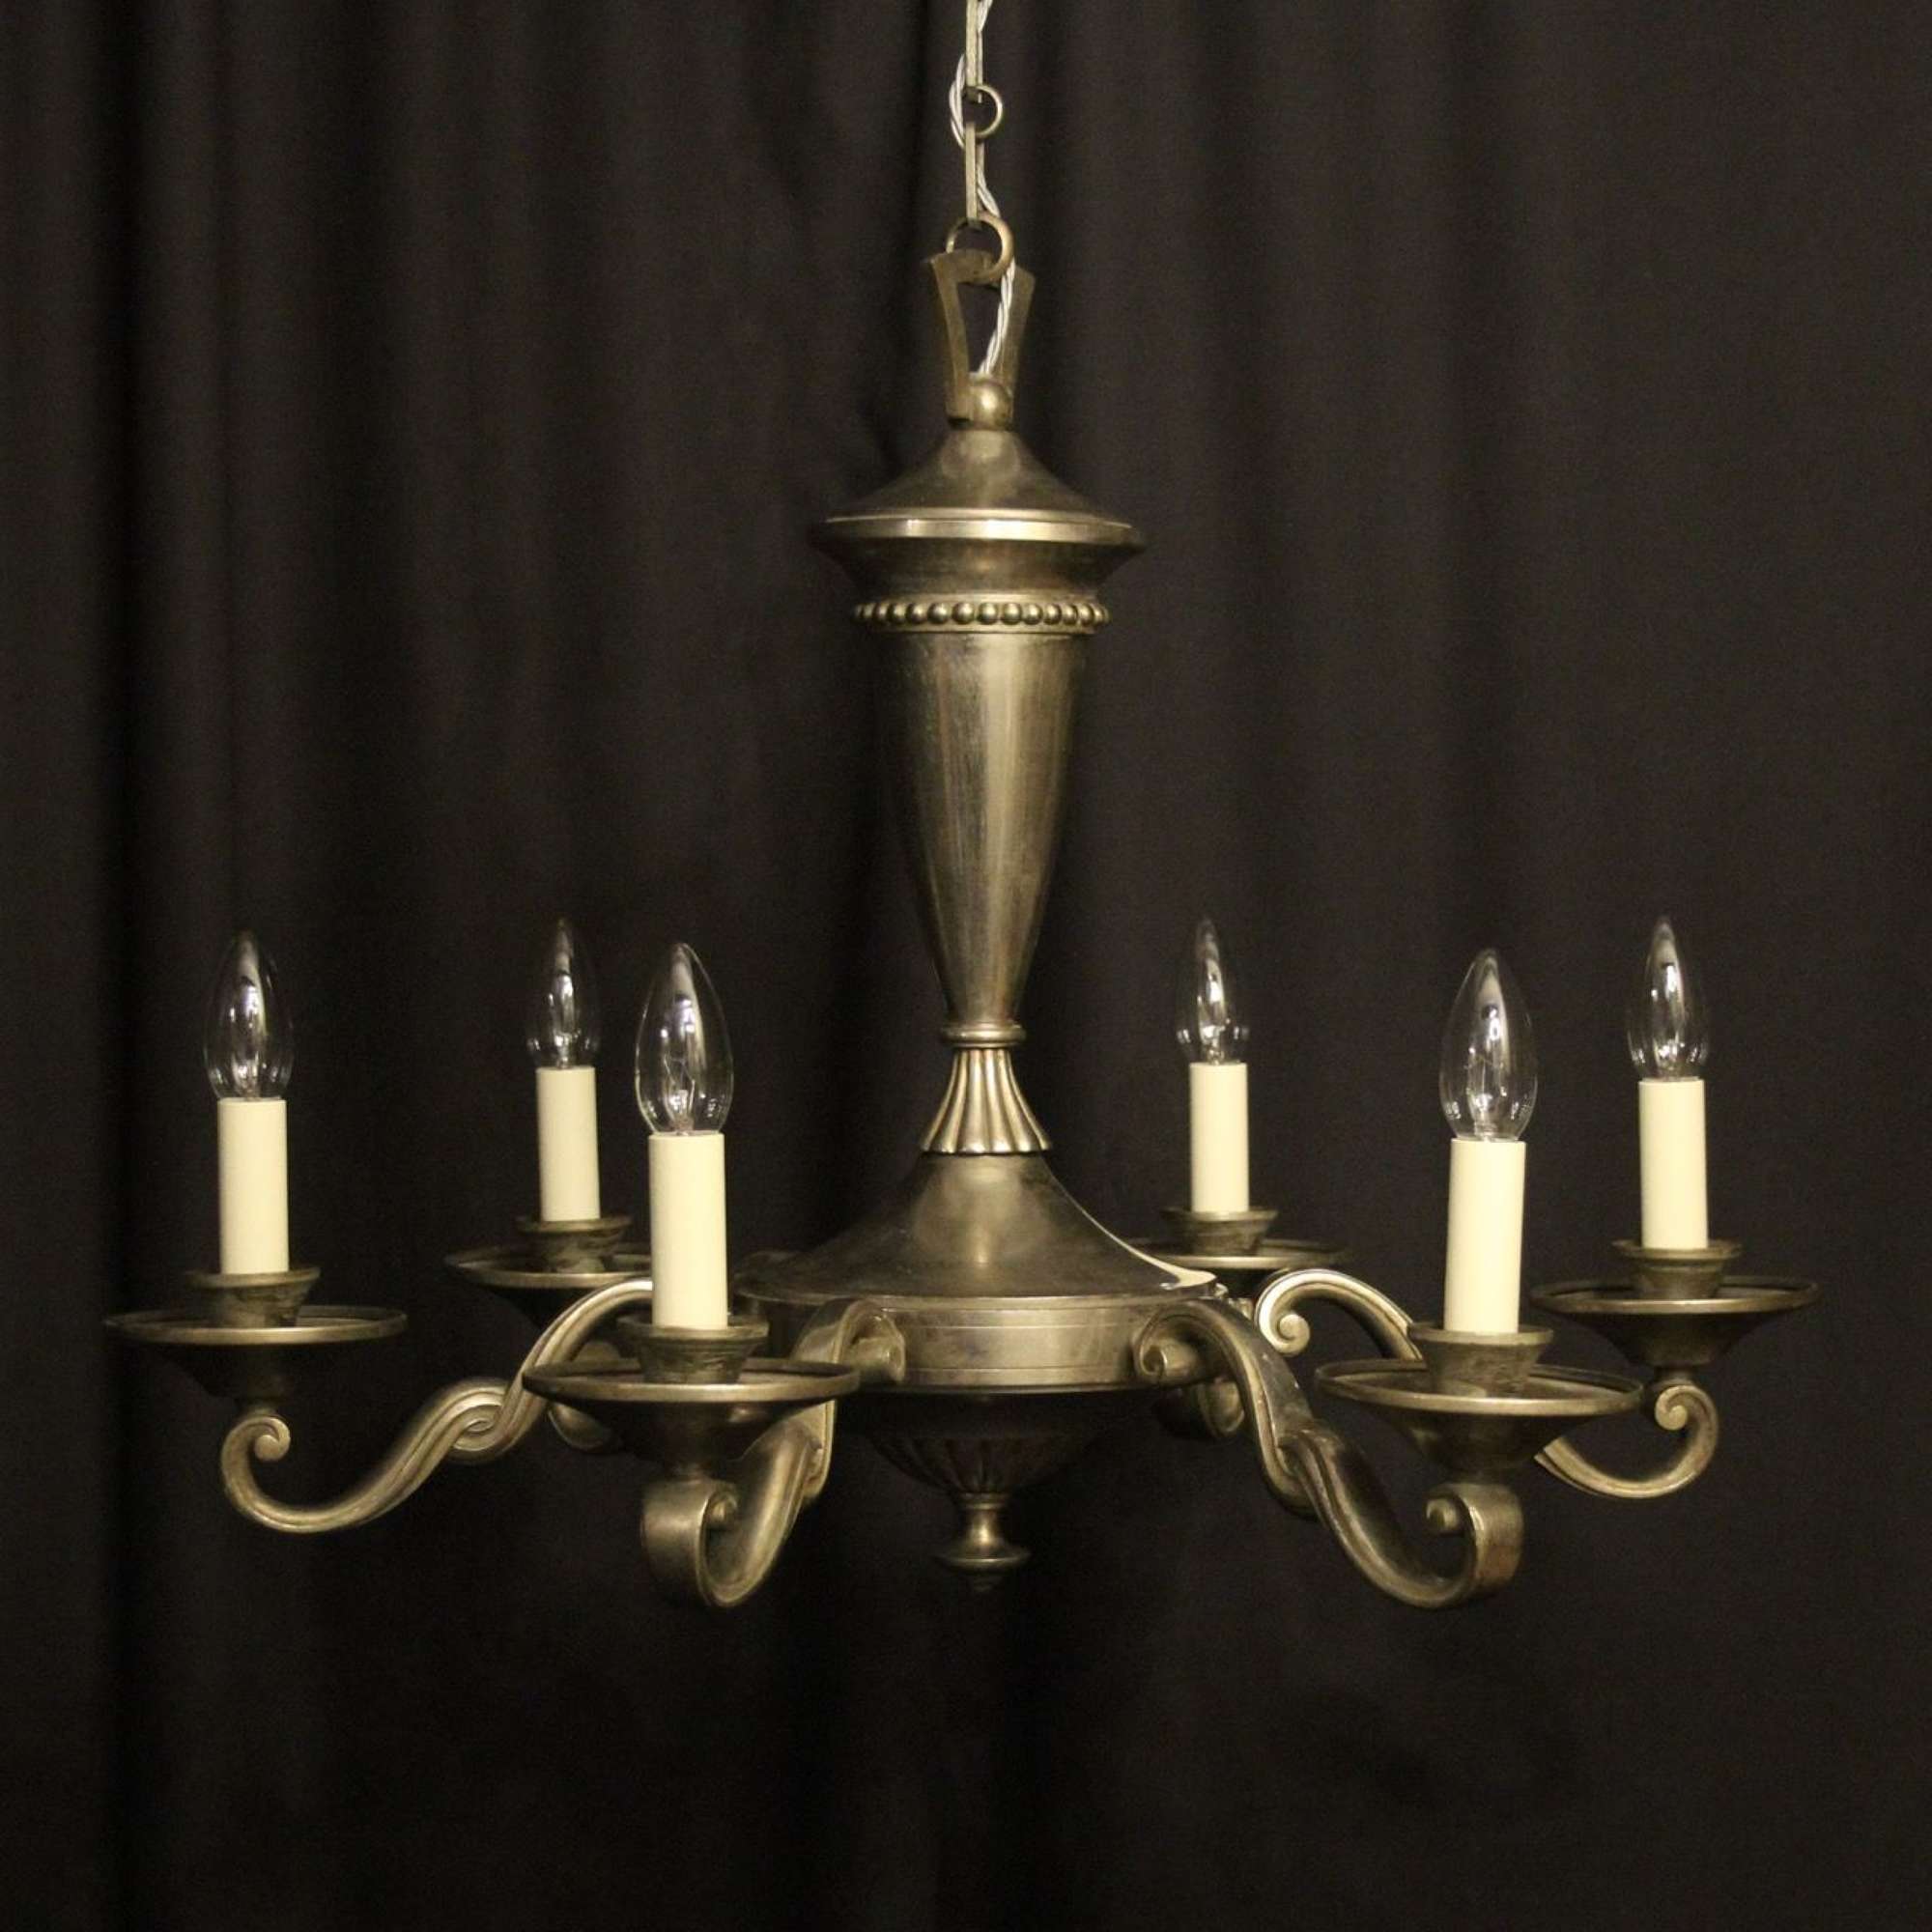 French Silver Gilded 6 Light Antique Chandelier